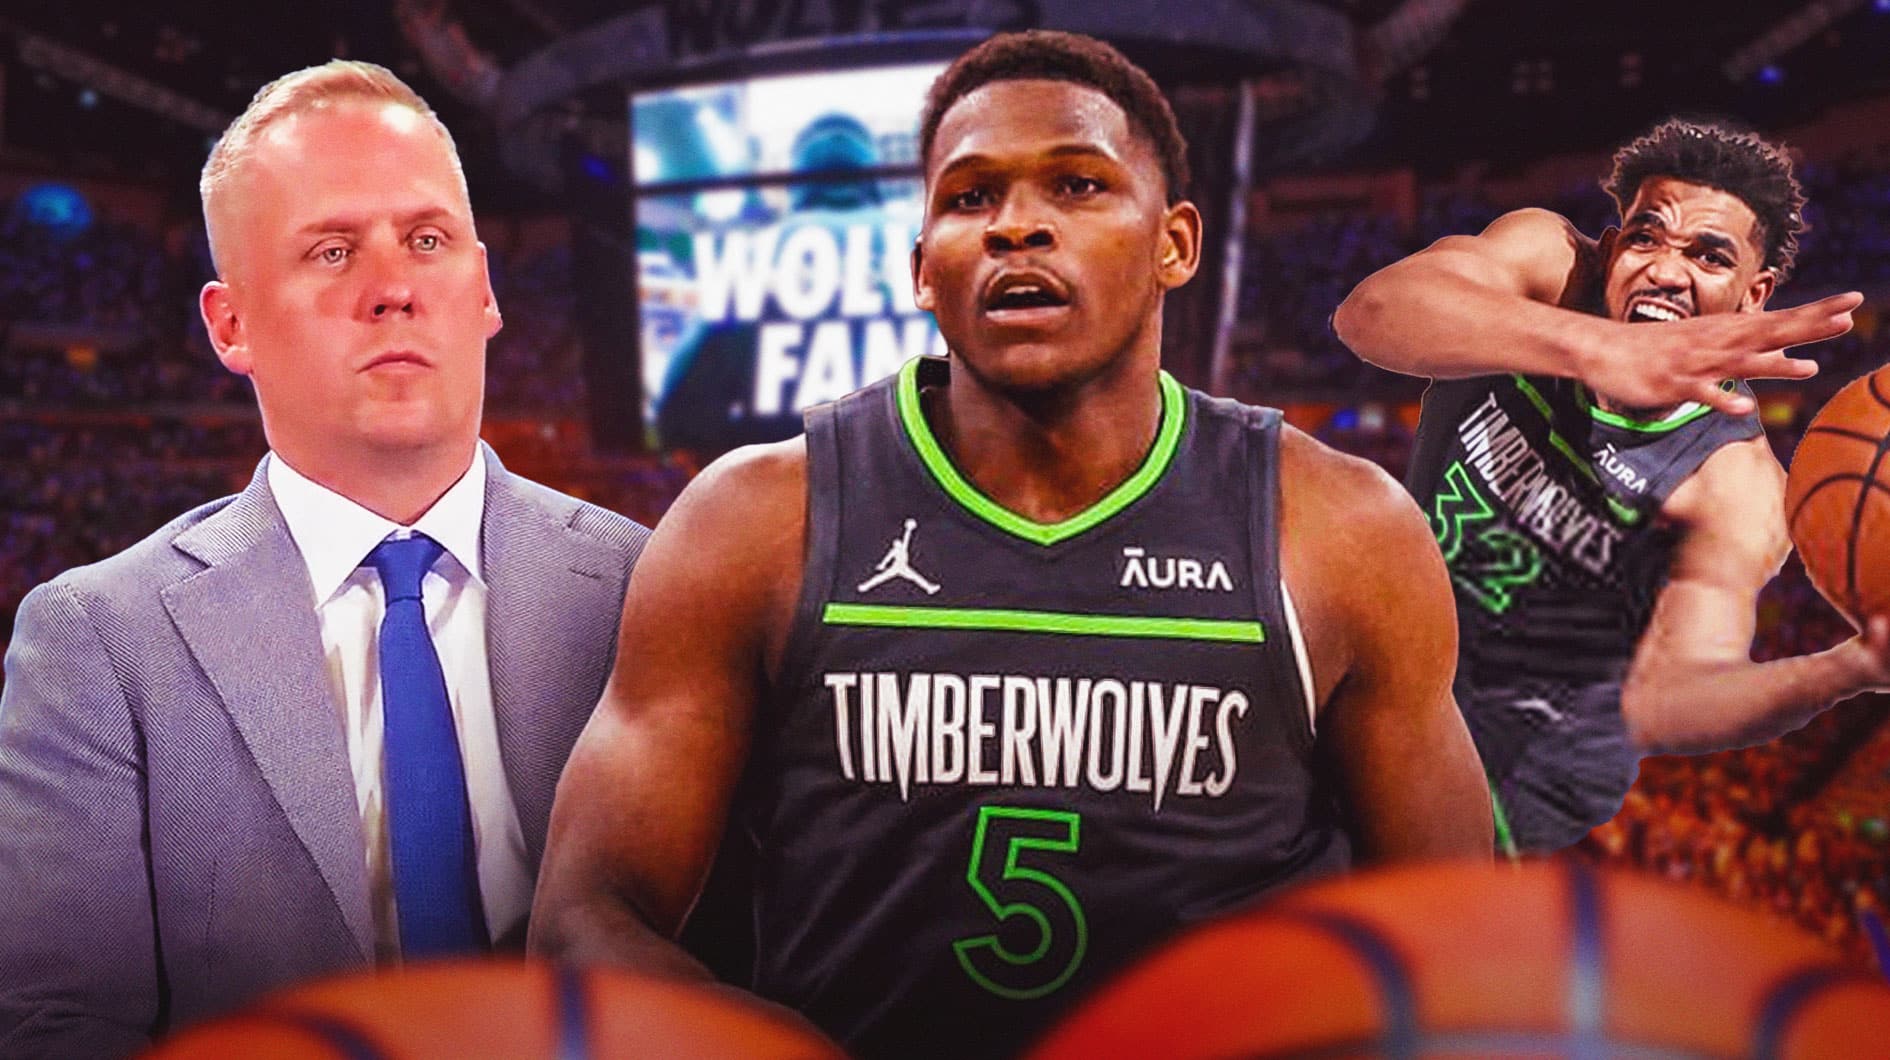 Timberwolves make attention-grabbing move on prized asset after playoff exit